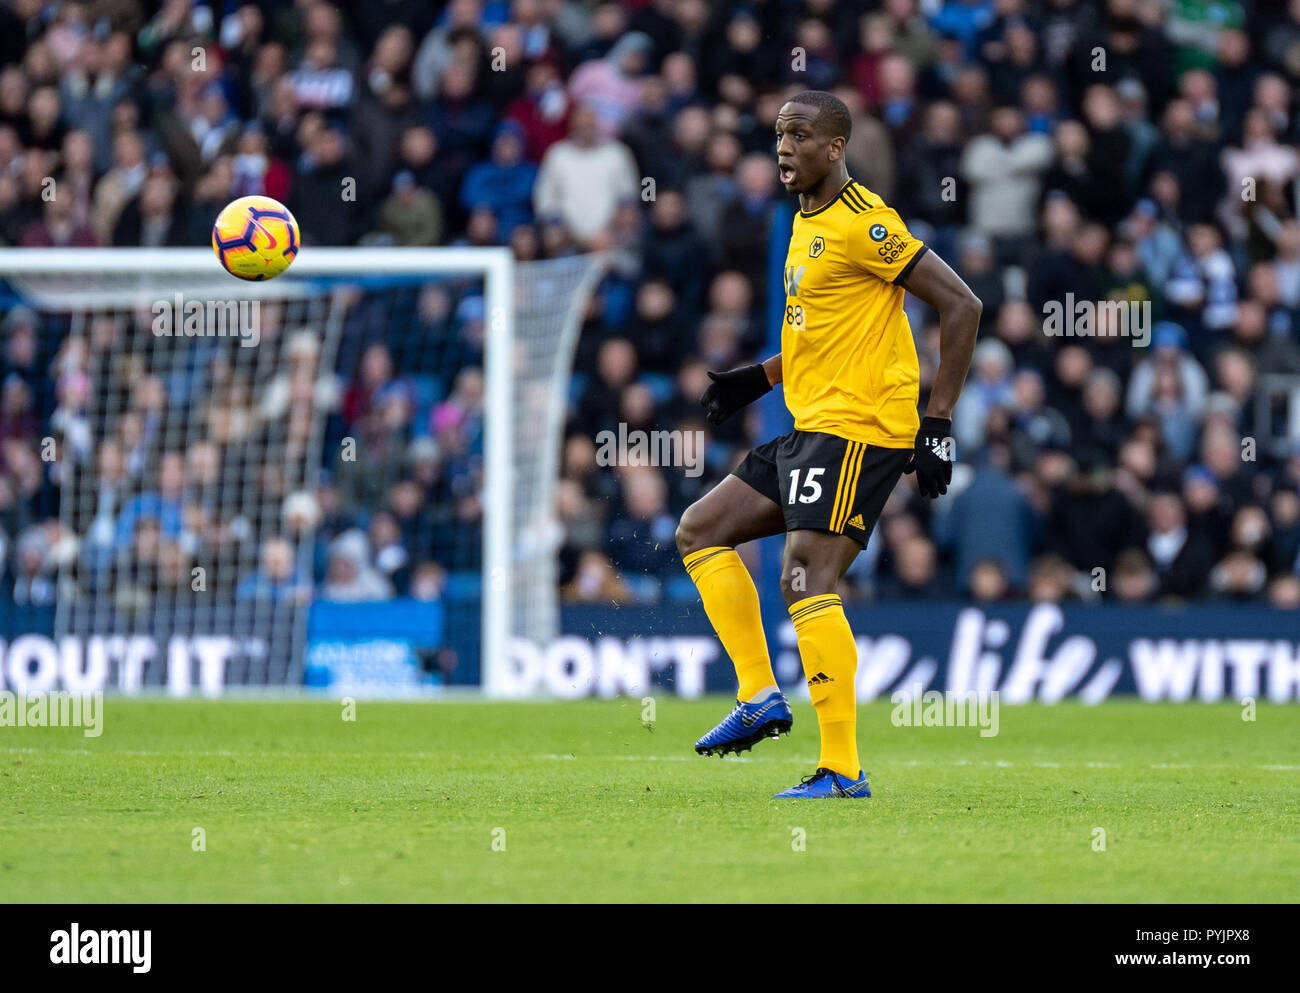 Brighton, UK. 27th Oct 2018. Willy Boly of Wolverhampton Wanderers during the Premier League match between Brighton and Hove Albion and Wolverhampton Wanderers at the AMEX Stadium, Brighton, England on 27 October 2018. Photo by Liam McAvoy. Credit: UK Sports Pics Ltd/Alamy Live News Stock Photo